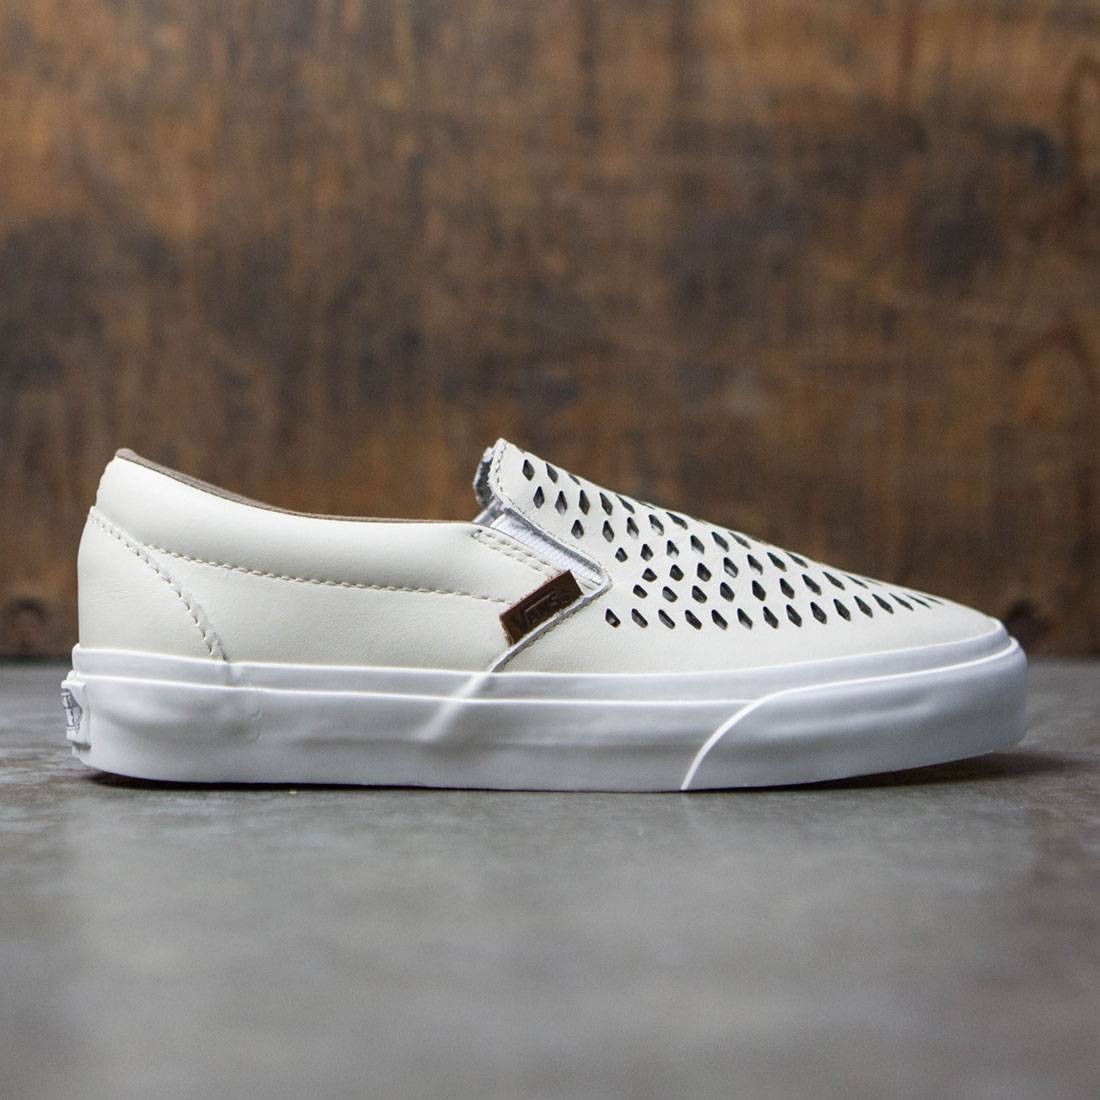 vans classic white leather